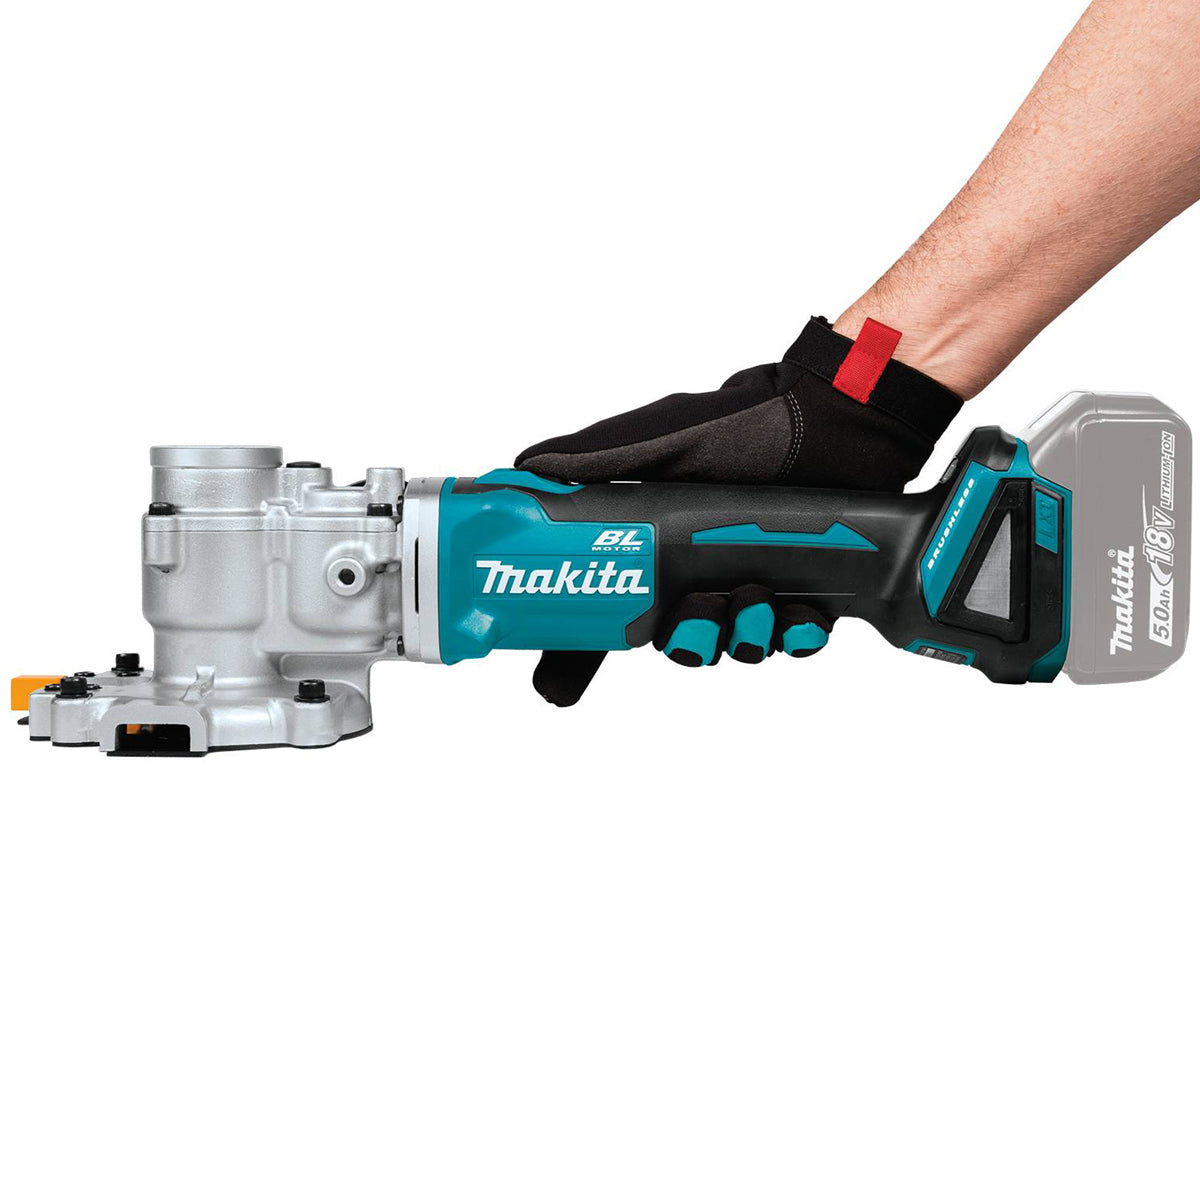 Makita DSC251ZK 18V LXT Brushless Steel Rod Cutter Body Only With Case